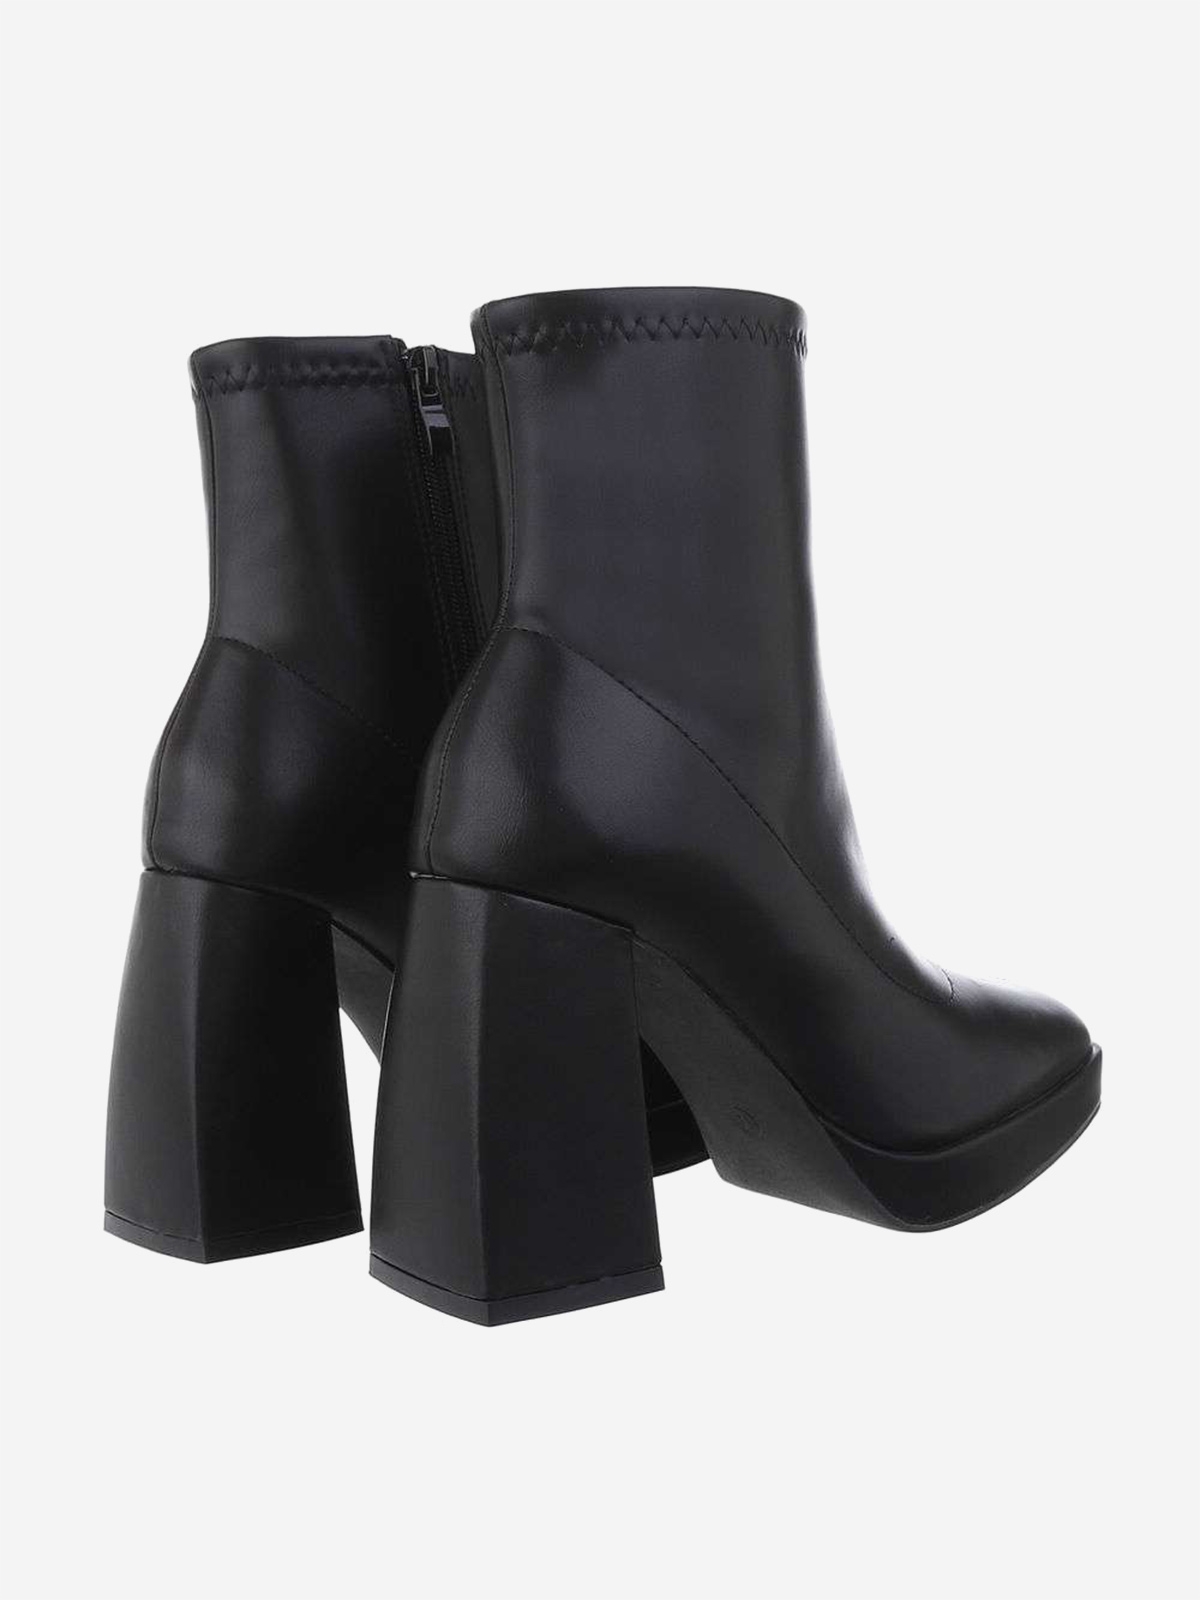 Elegant high heeled women's ankle boots in black